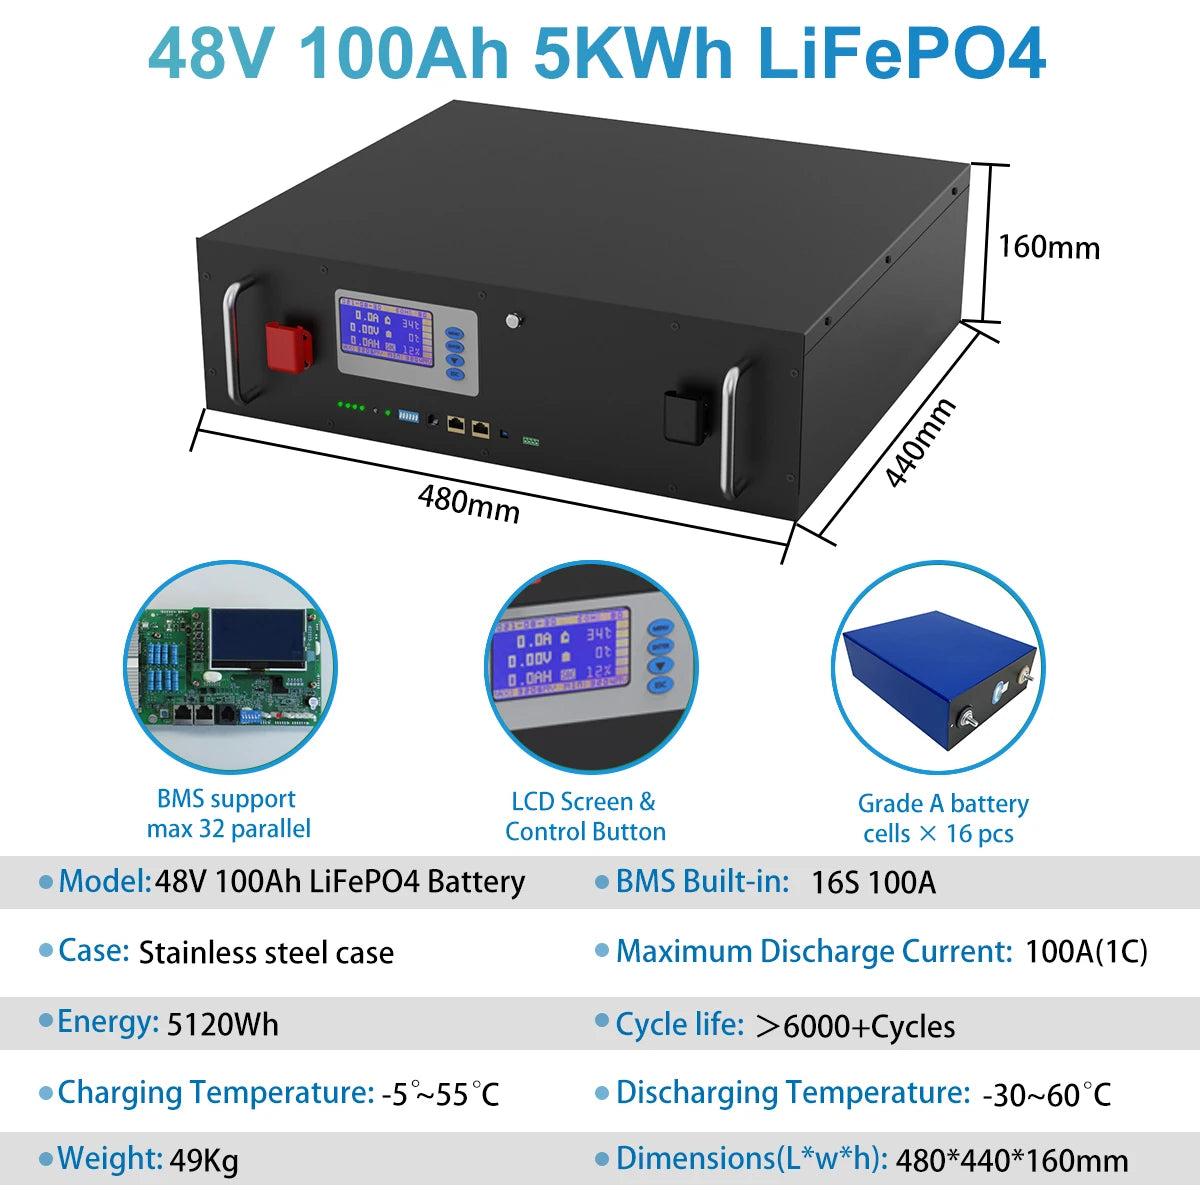 LiFePO4 48V 5KW Battery, 48V 100Ah LiFePO4 battery pack with BMS and LCD screen for high-performance applications.